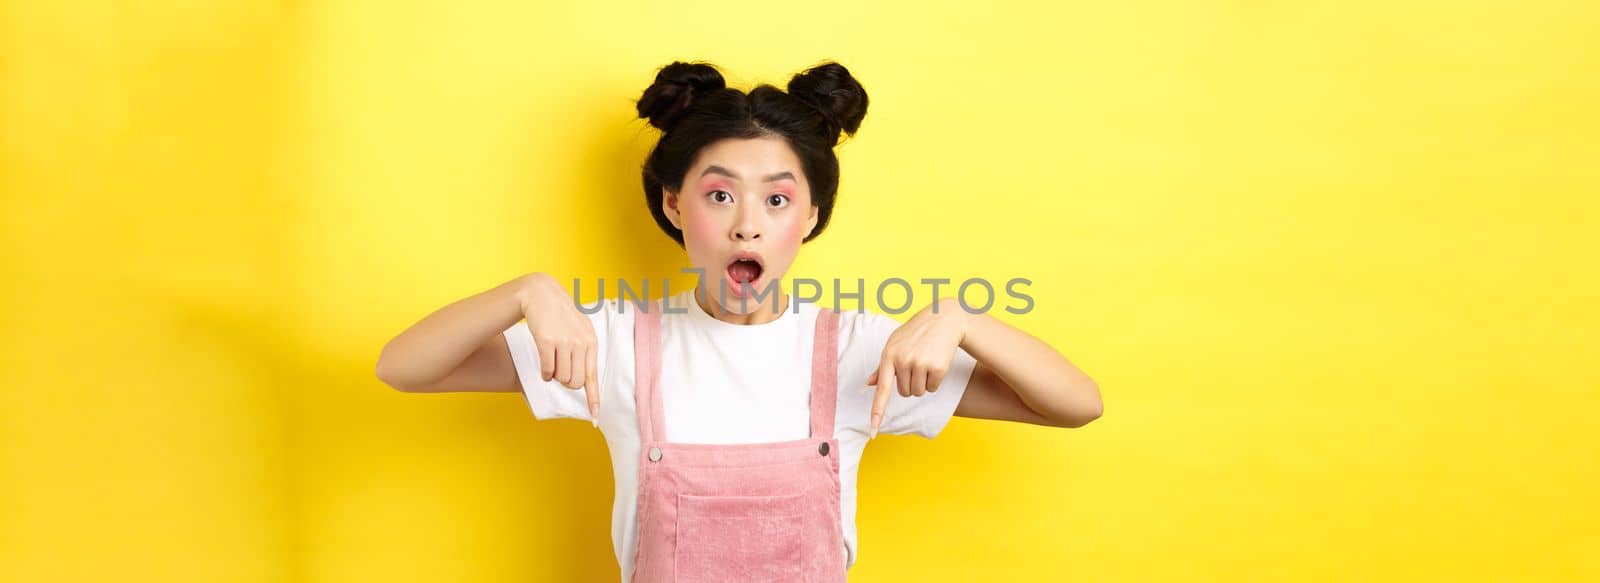 Surprised asian woman with glamour makeup and hairstyle, drop jaw and pointing down amazed, standing against yellow background.